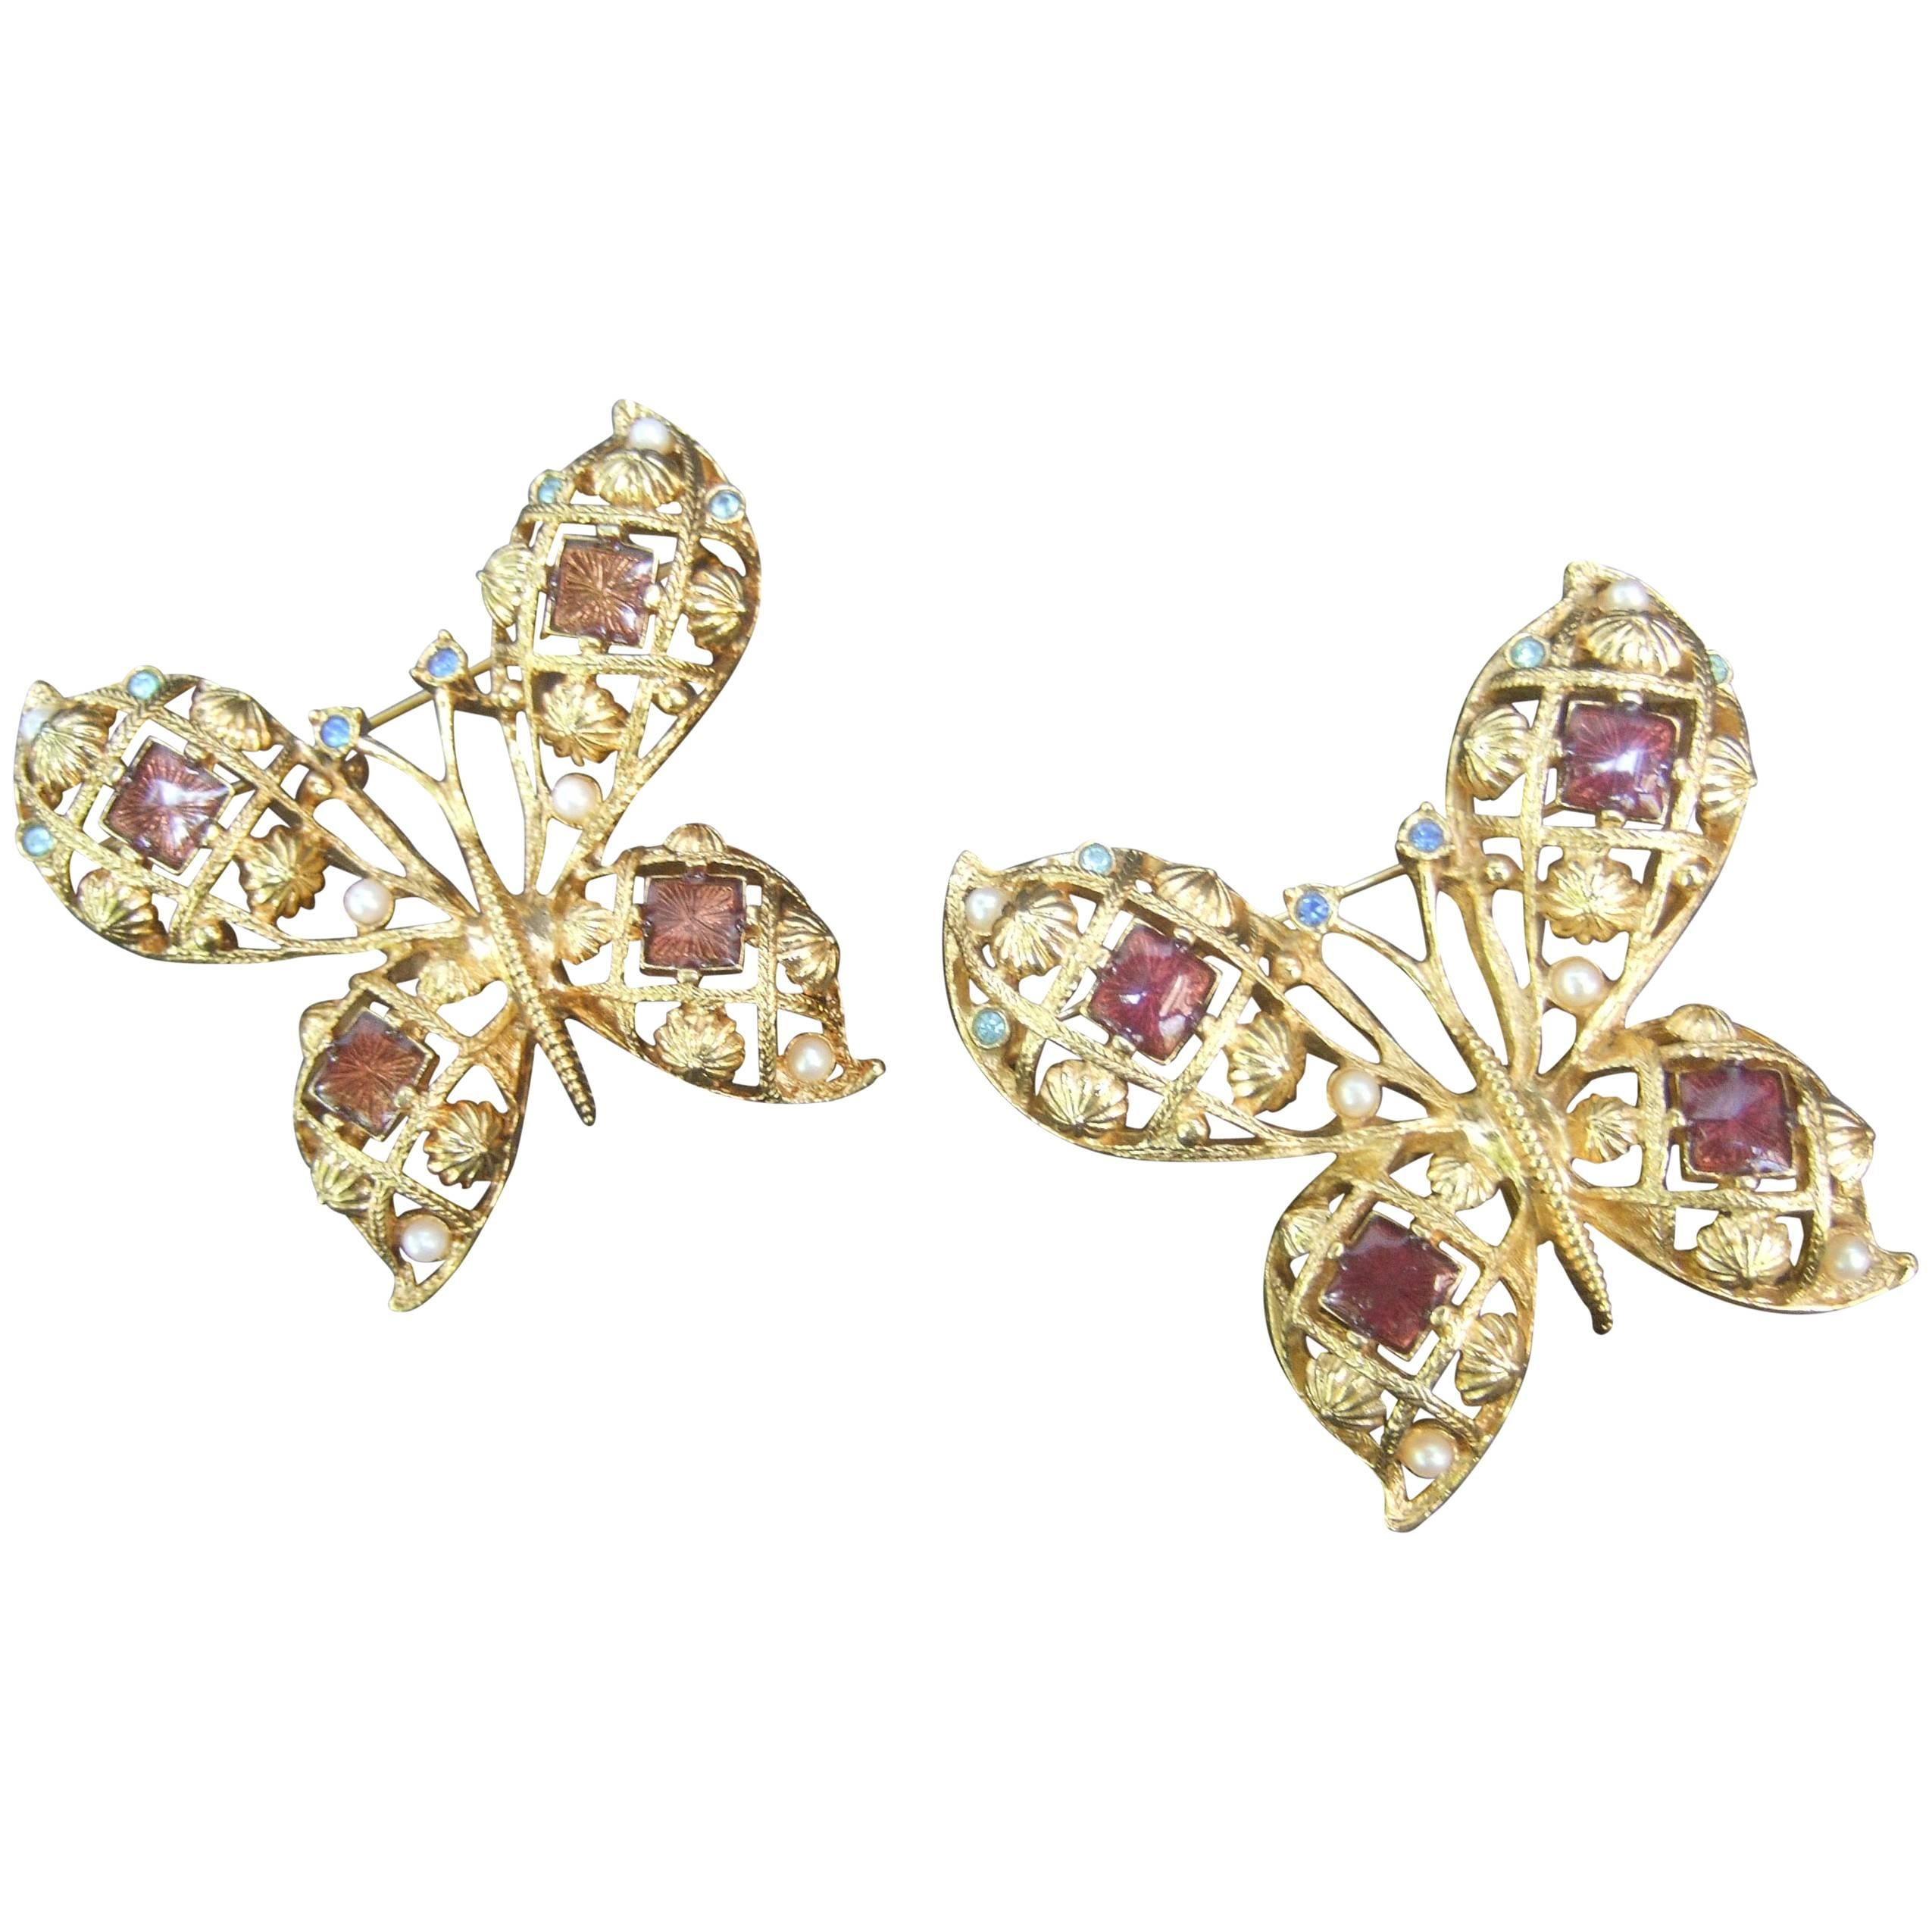 Pair of Jeweled Enamel Gilt Metal Butterfly Brooches circa 1980s